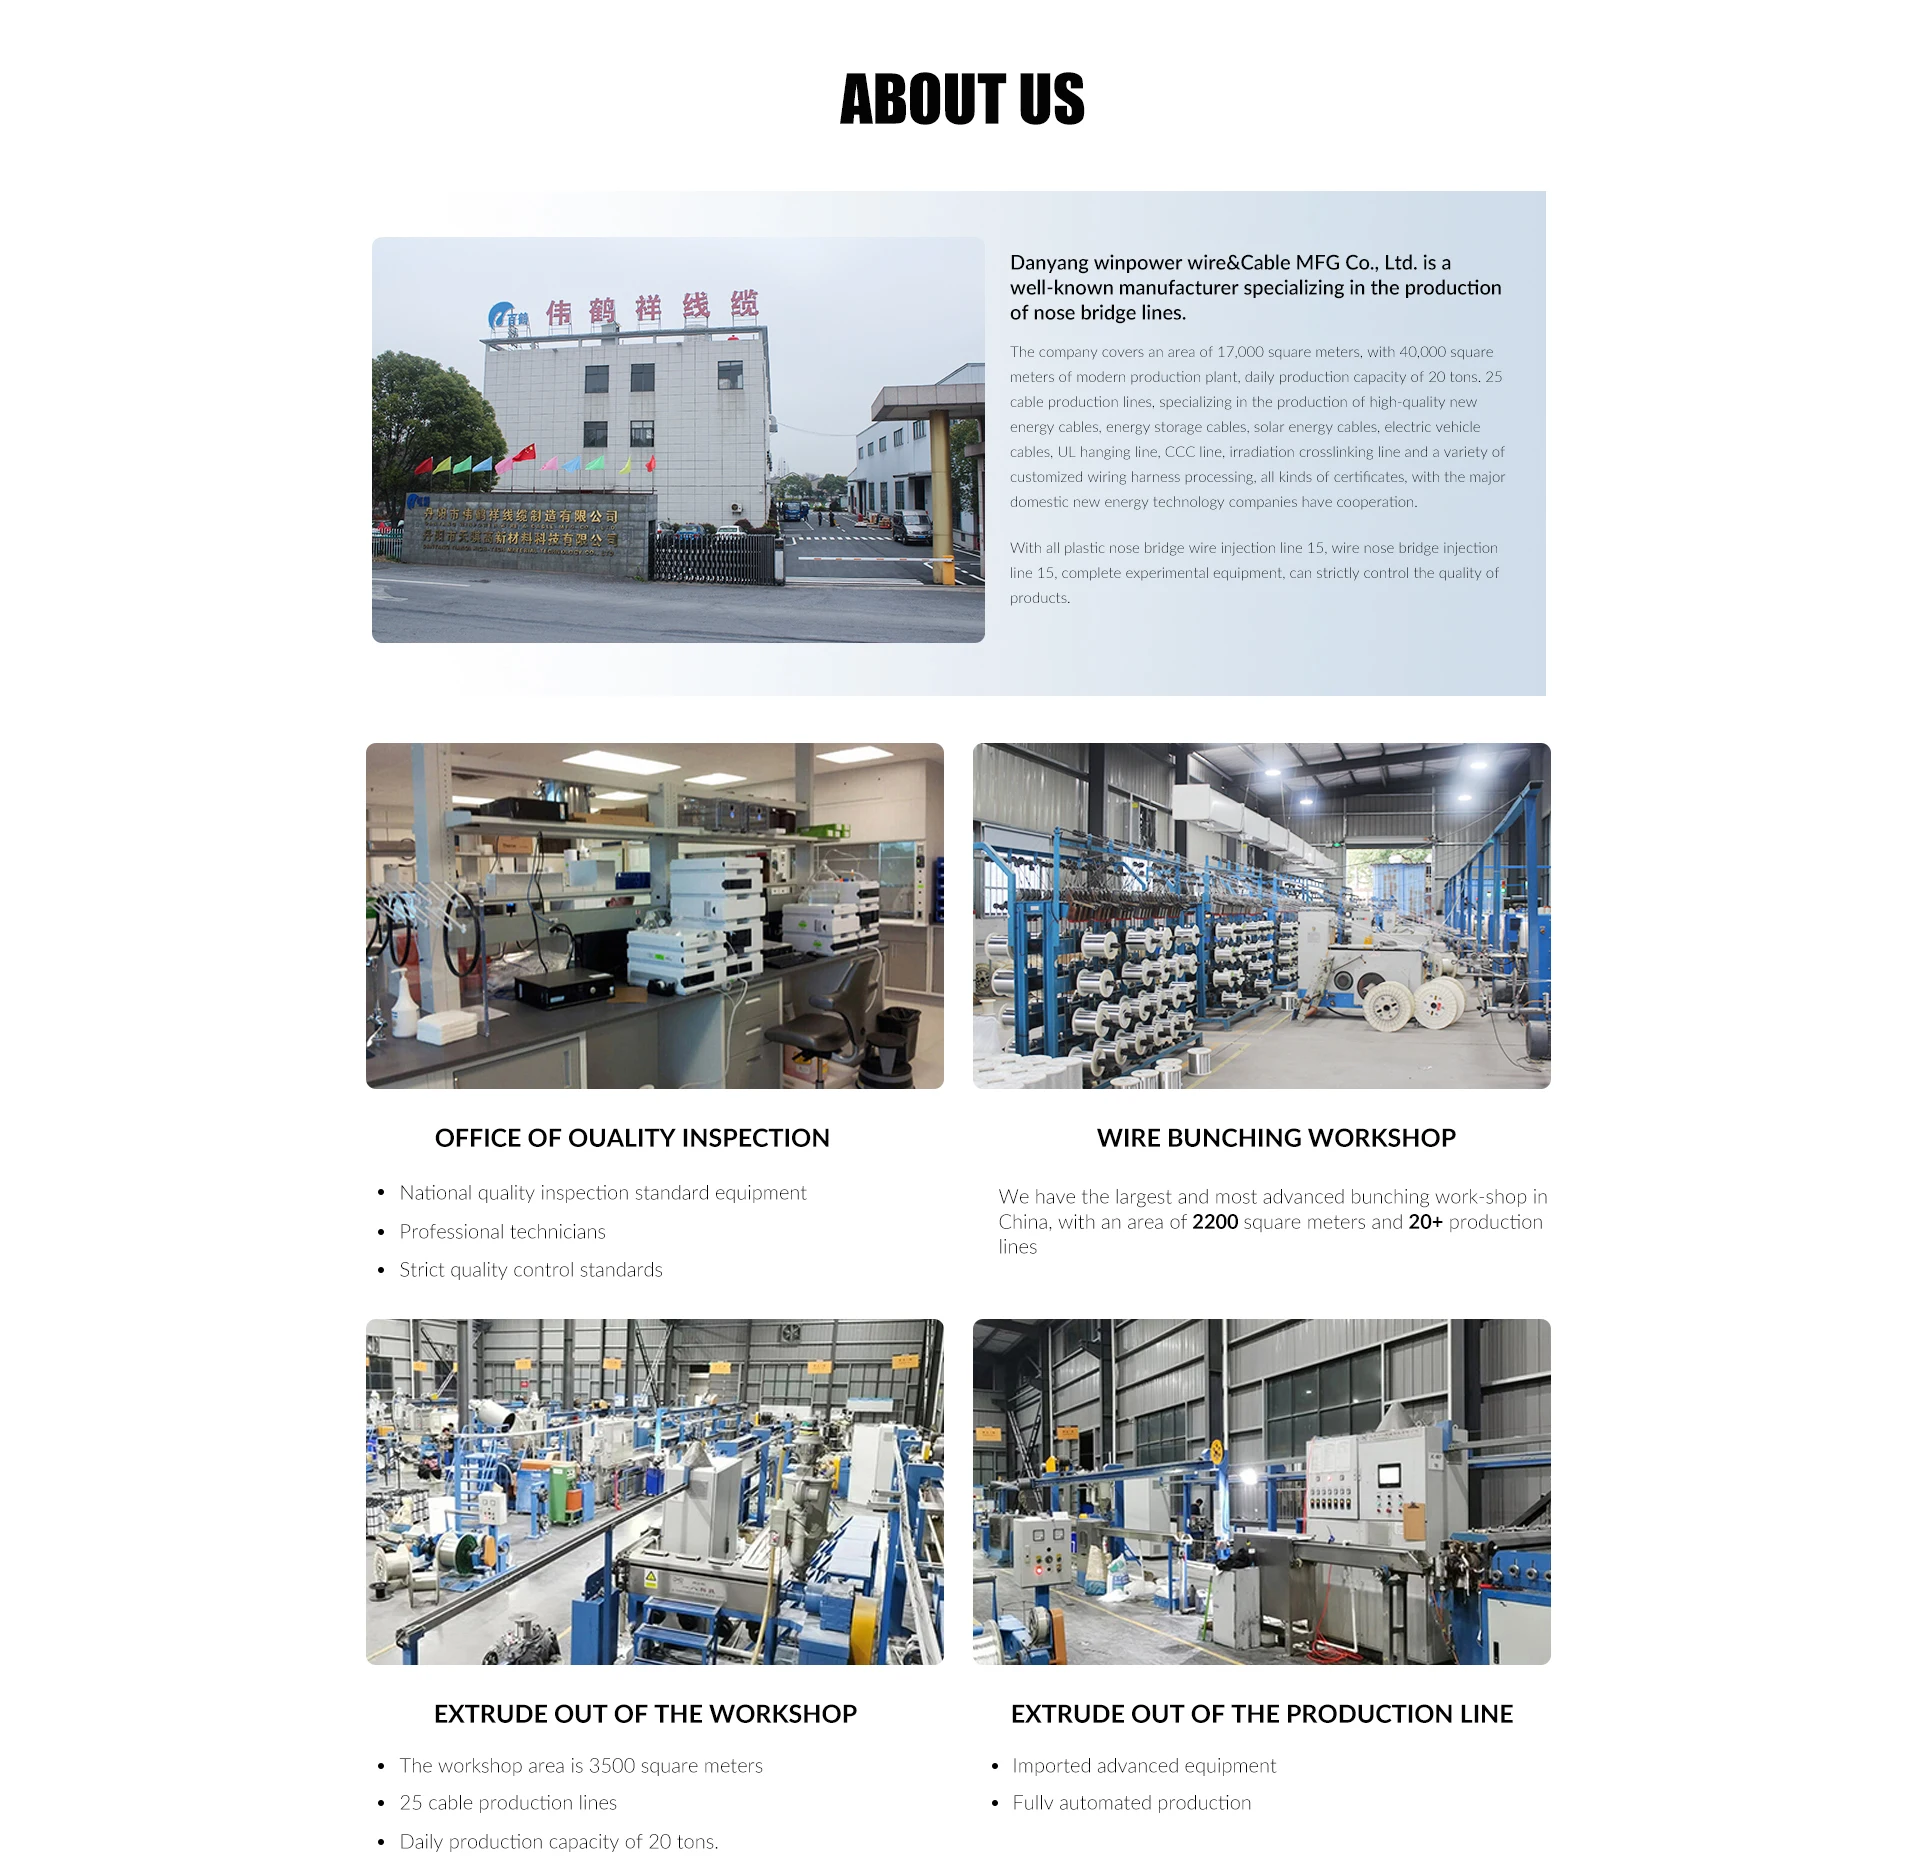 Danyang Winpower Wire & Cable Mfg Co., Ltd. - Nose Wire, Electrical Wire